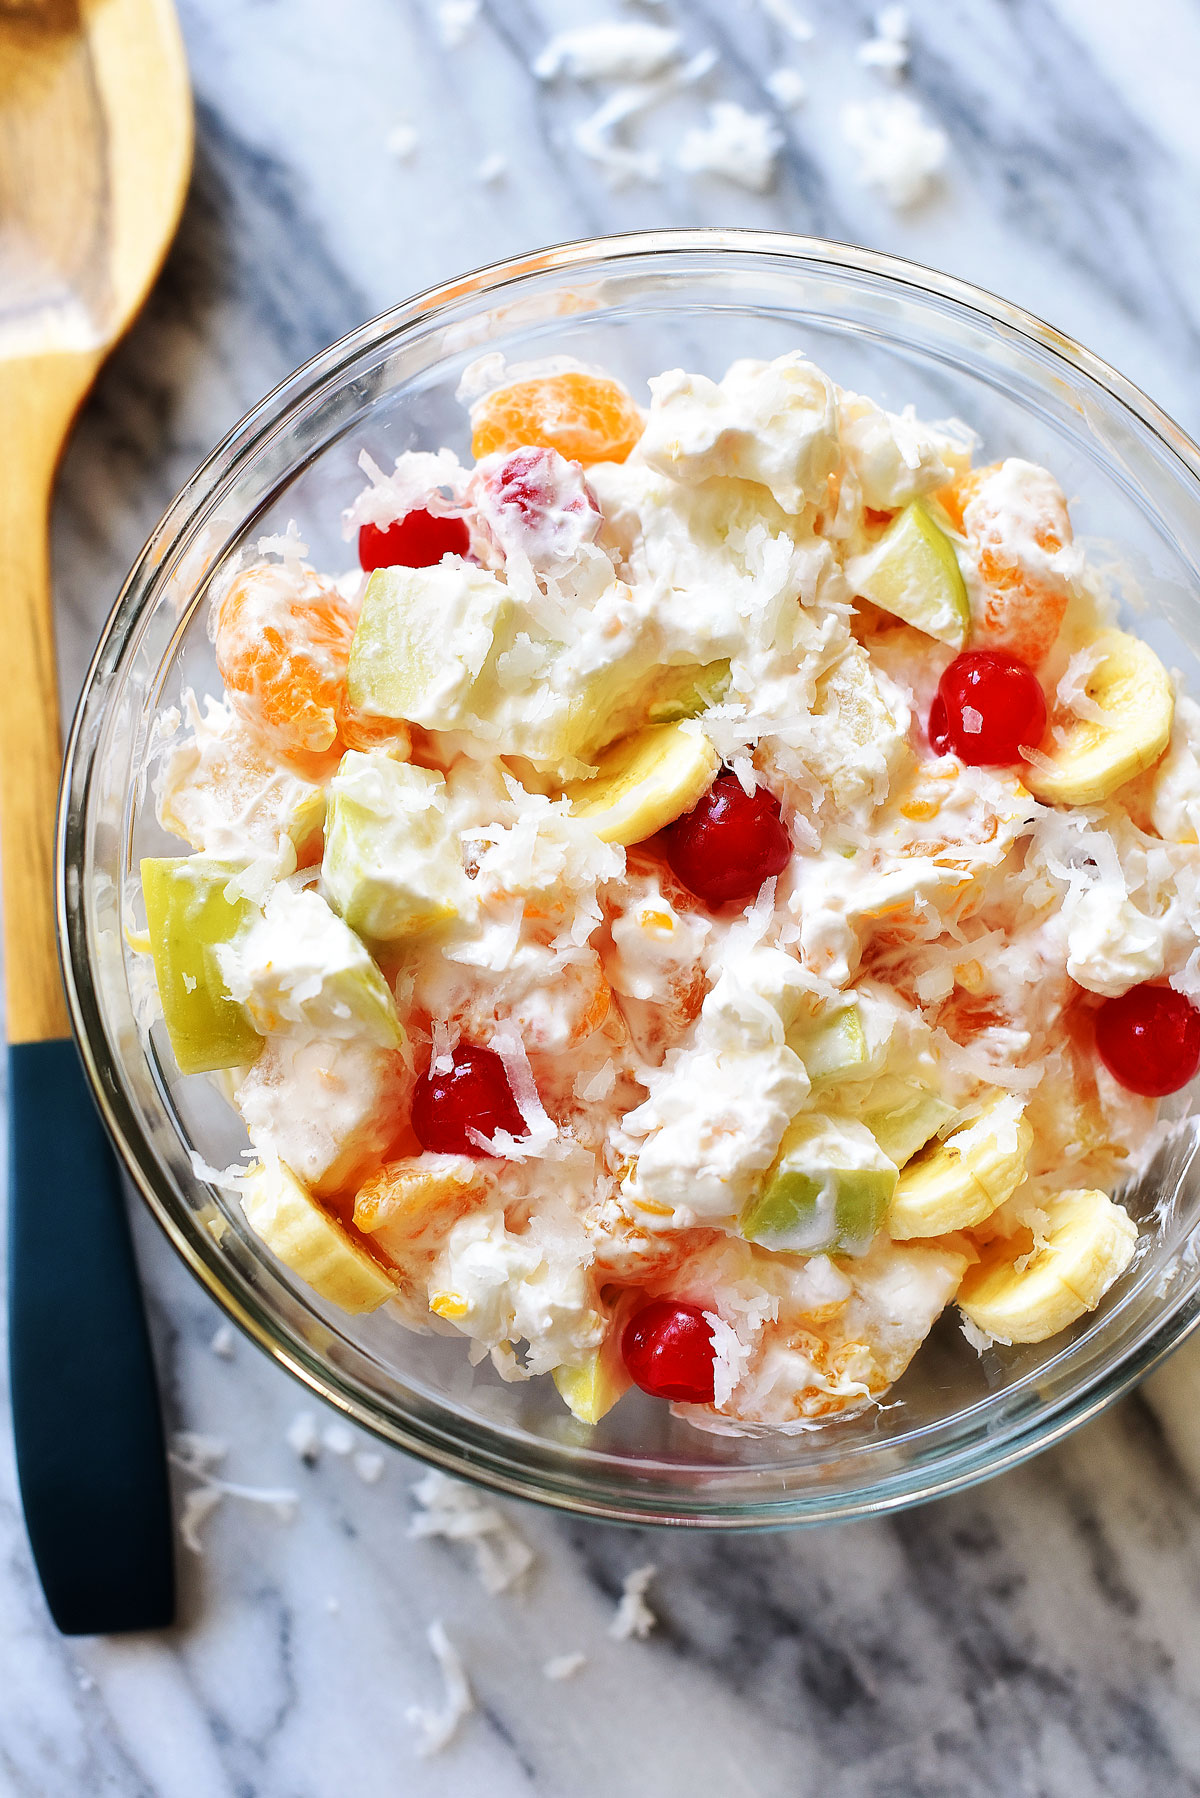 This Creamy Fruit Salad is filled with refreshing fruit, coconut shavings, marshmallows and whipped cream. Life-in-the-Lofthouse.com